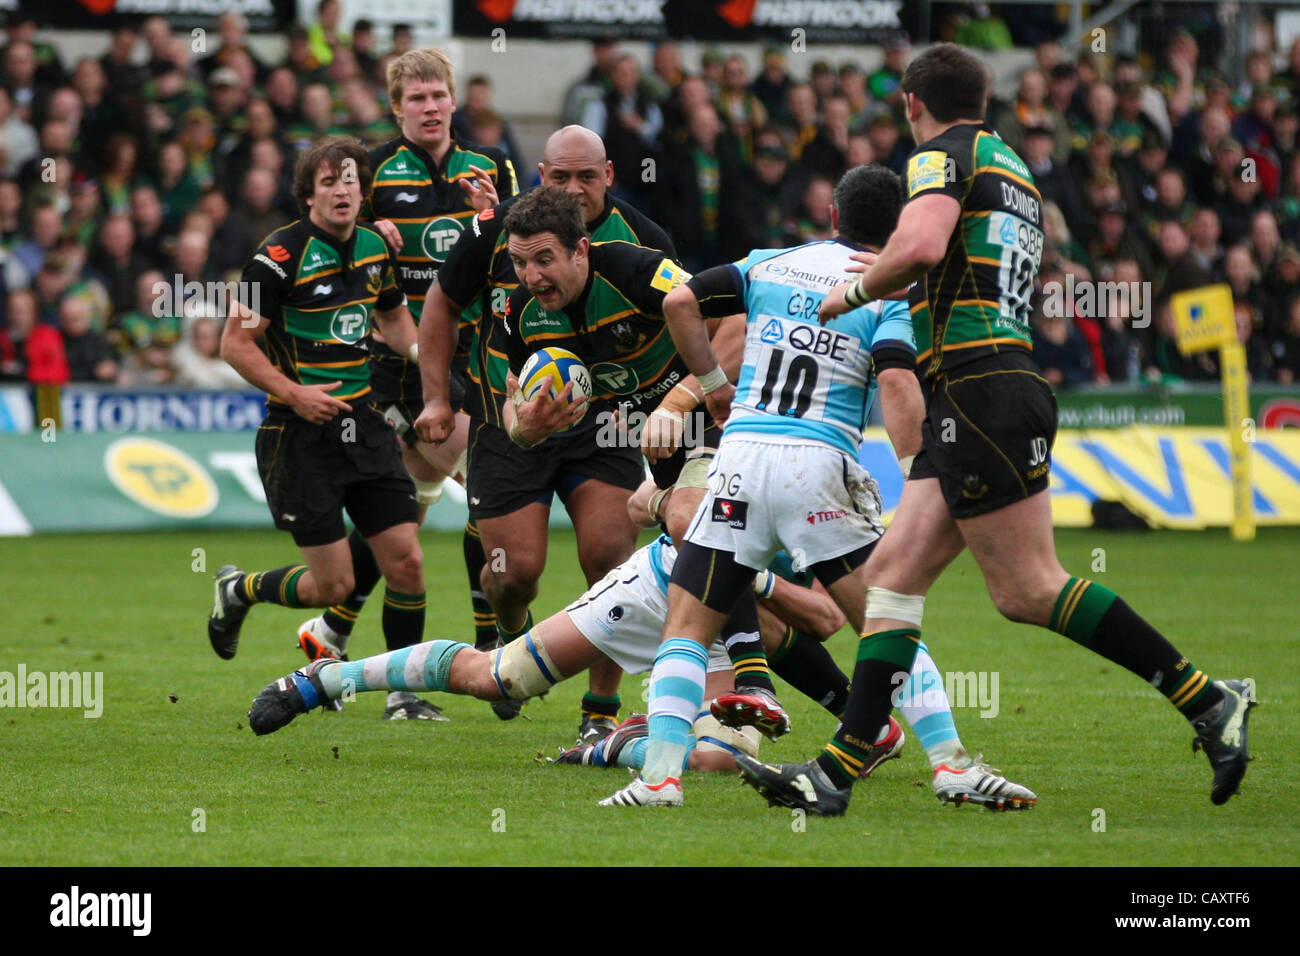 05.05.2012 Northampton, England. Rugby Union. Northampton Saints v Worcester Warriors. Phil DOWSON of Northampton Saints is tackled by James PERCIVAL of Worcester Warriors during the Aviva Premiership match between Northampton Saints and Worcester Warriors at Franklin's Gardens.  Final score: Northa Stock Photo